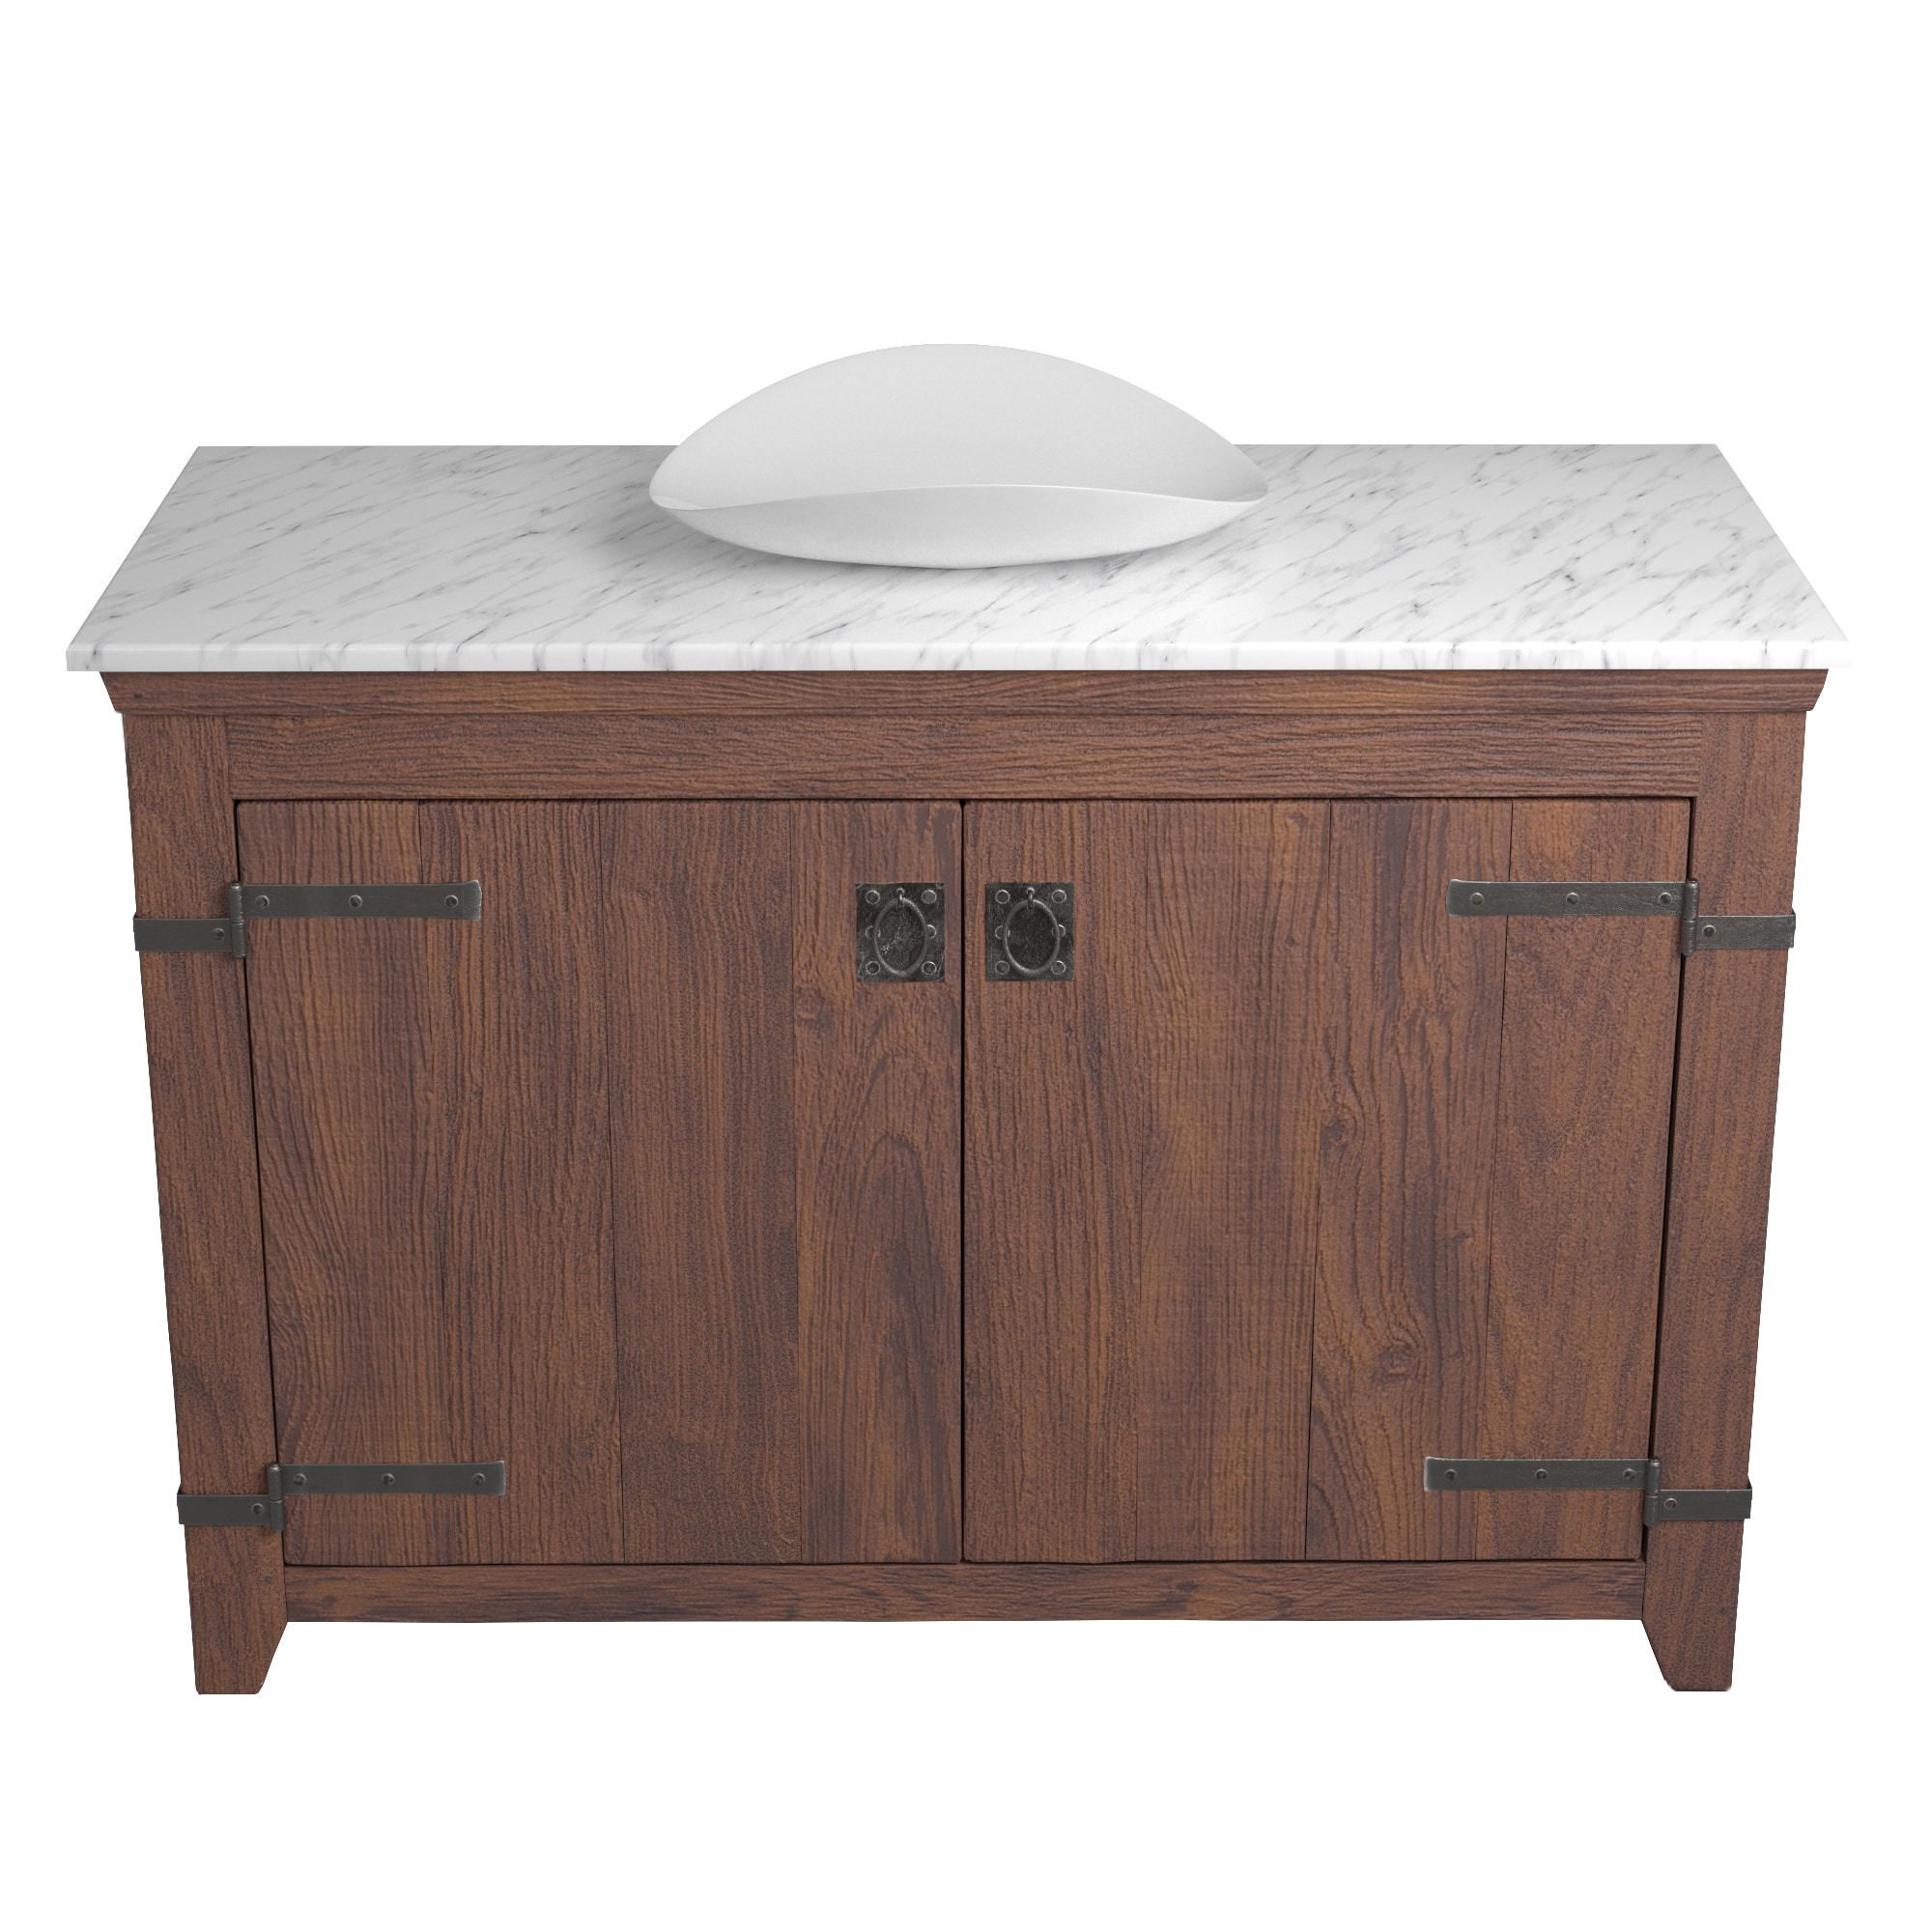 Native Trails 48" Americana Vanity in Chestnut with Carrara Marble Top and Sorrento in Bianco, No Faucet Hole, BND48-VB-CT-MG-100